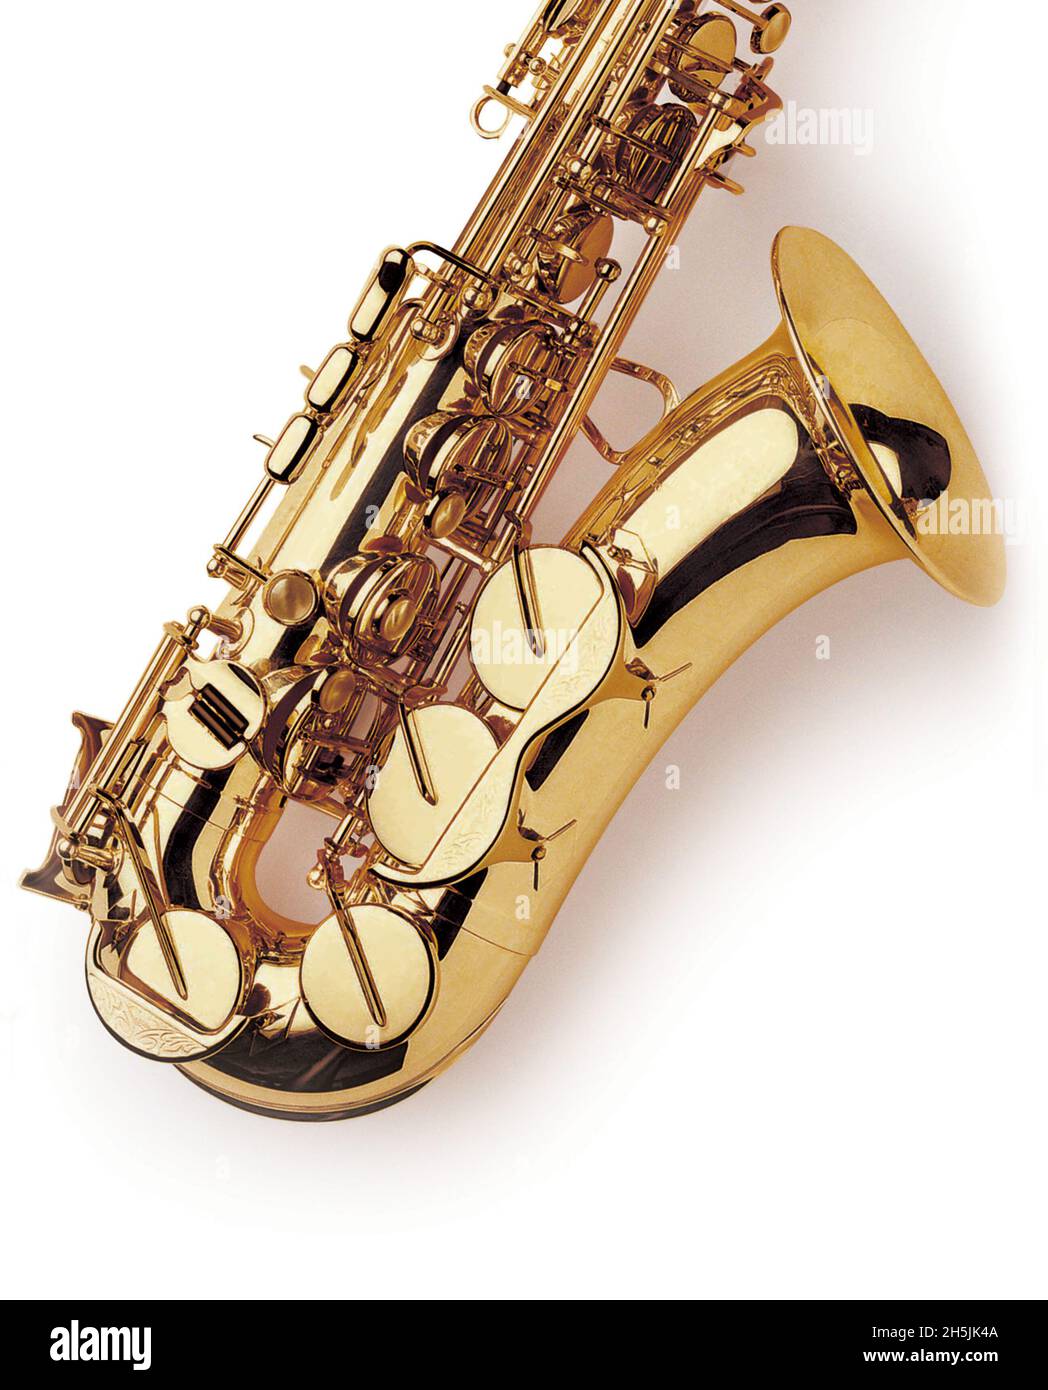 Section of a brass saxophone at an angle on white background copy space woodwind single reed musical instrument Stock Photo